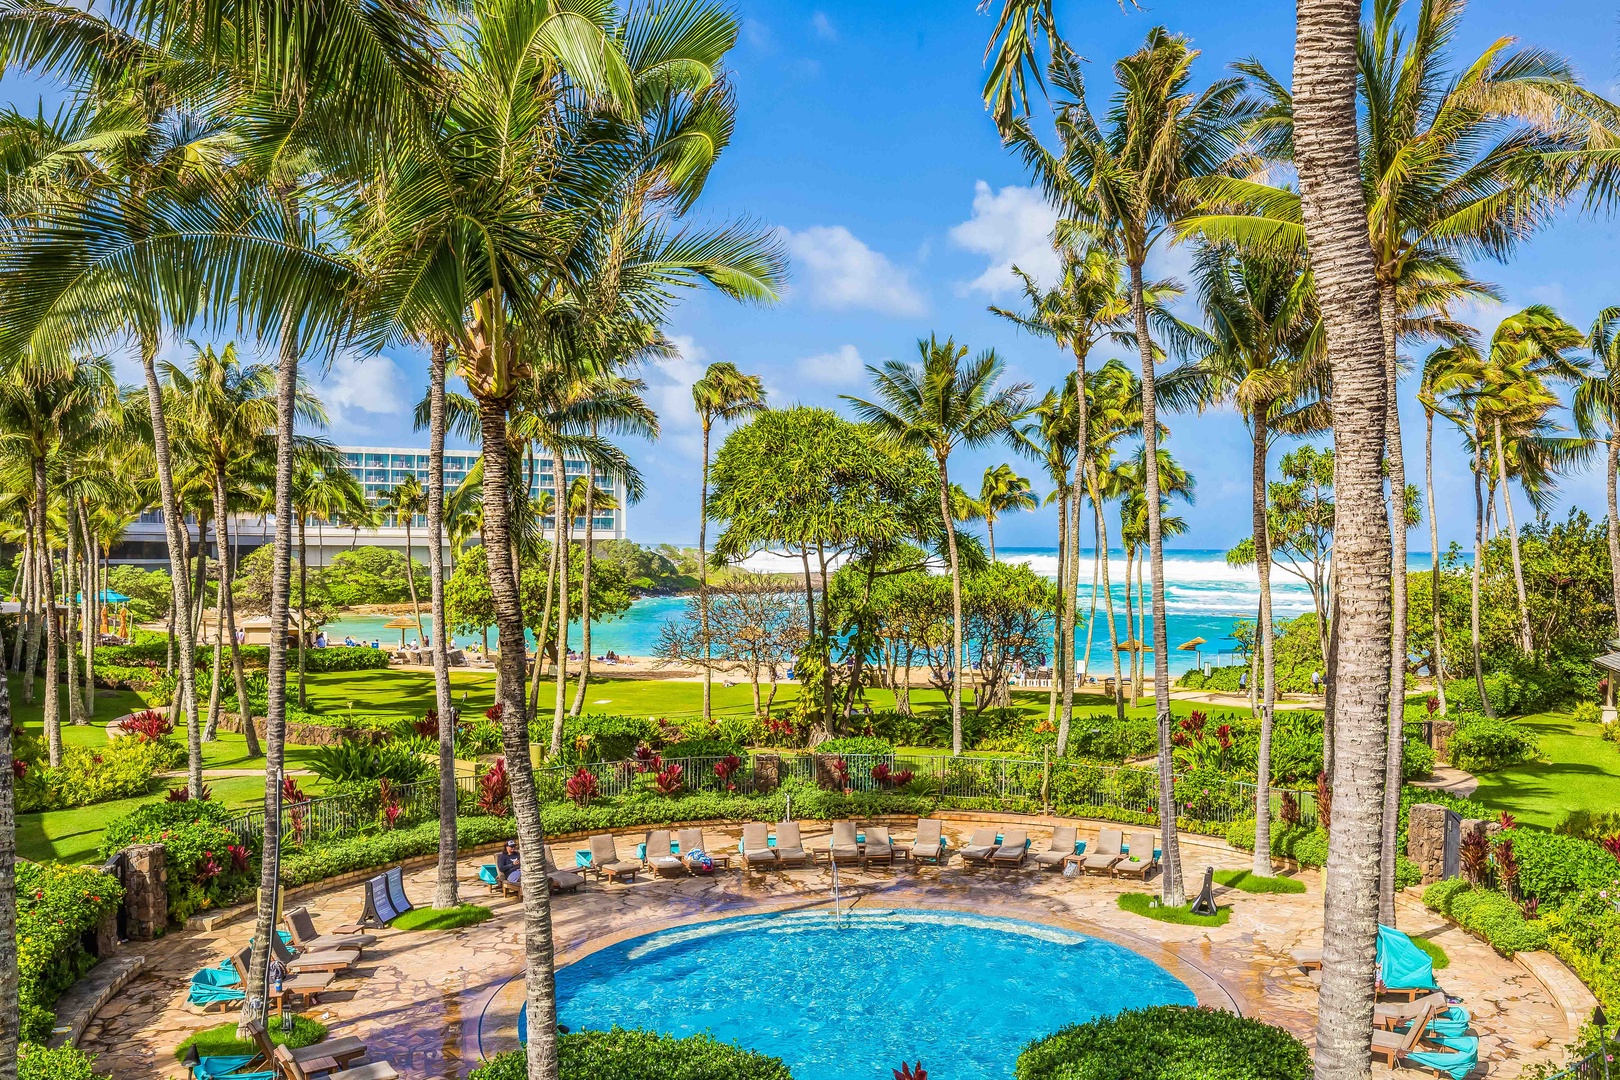 Kahuku Vacation Rentals, Turtle Bay Villas 311 - Step outside onto your private, 167-square foot lanai to take in views of the lush, tropical grounds, awe-inspiring Pacific, and dazzling pool just mere steps away from your back door